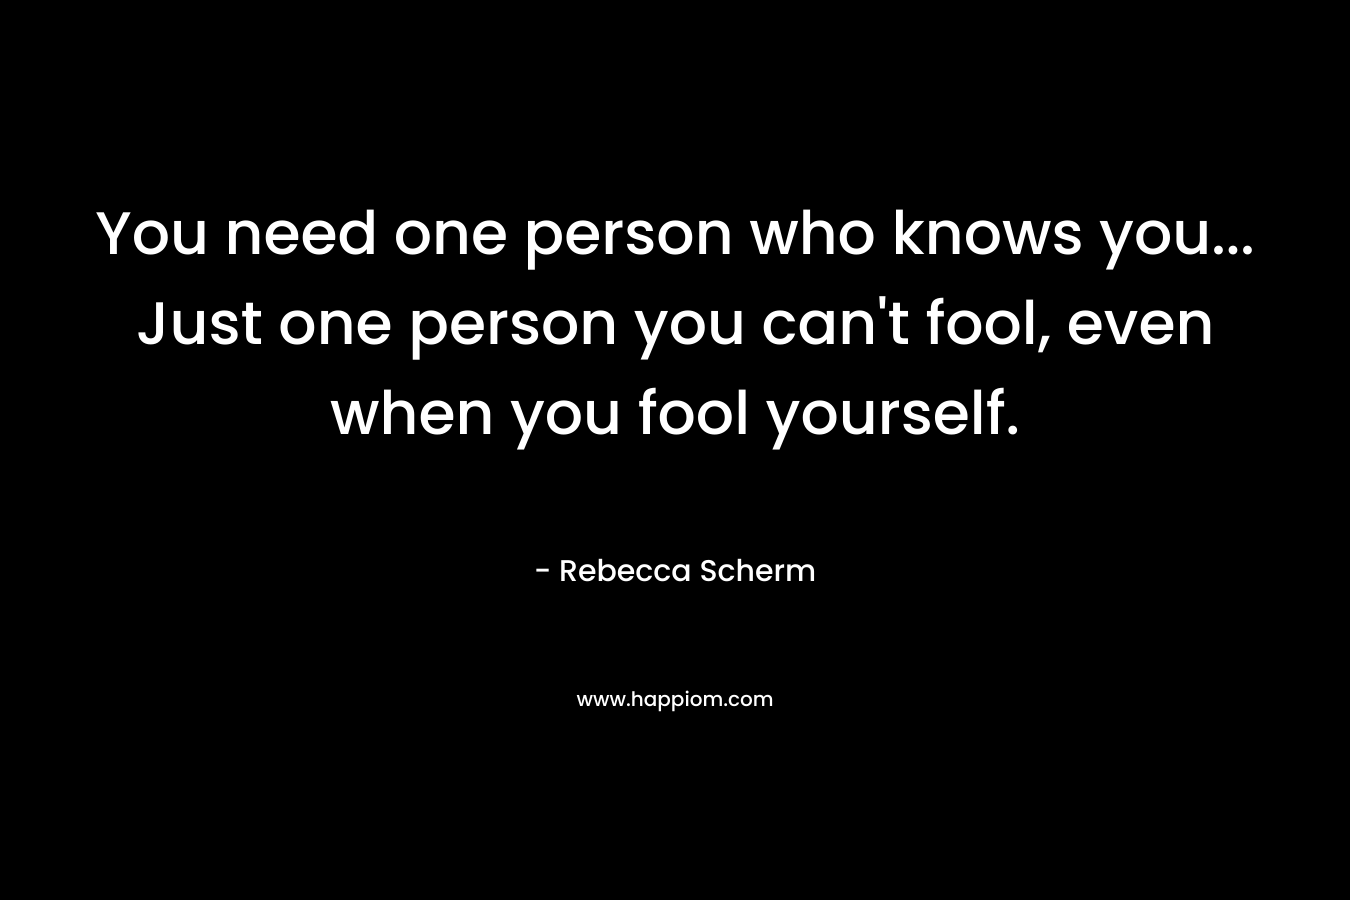 You need one person who knows you... Just one person you can't fool, even when you fool yourself.